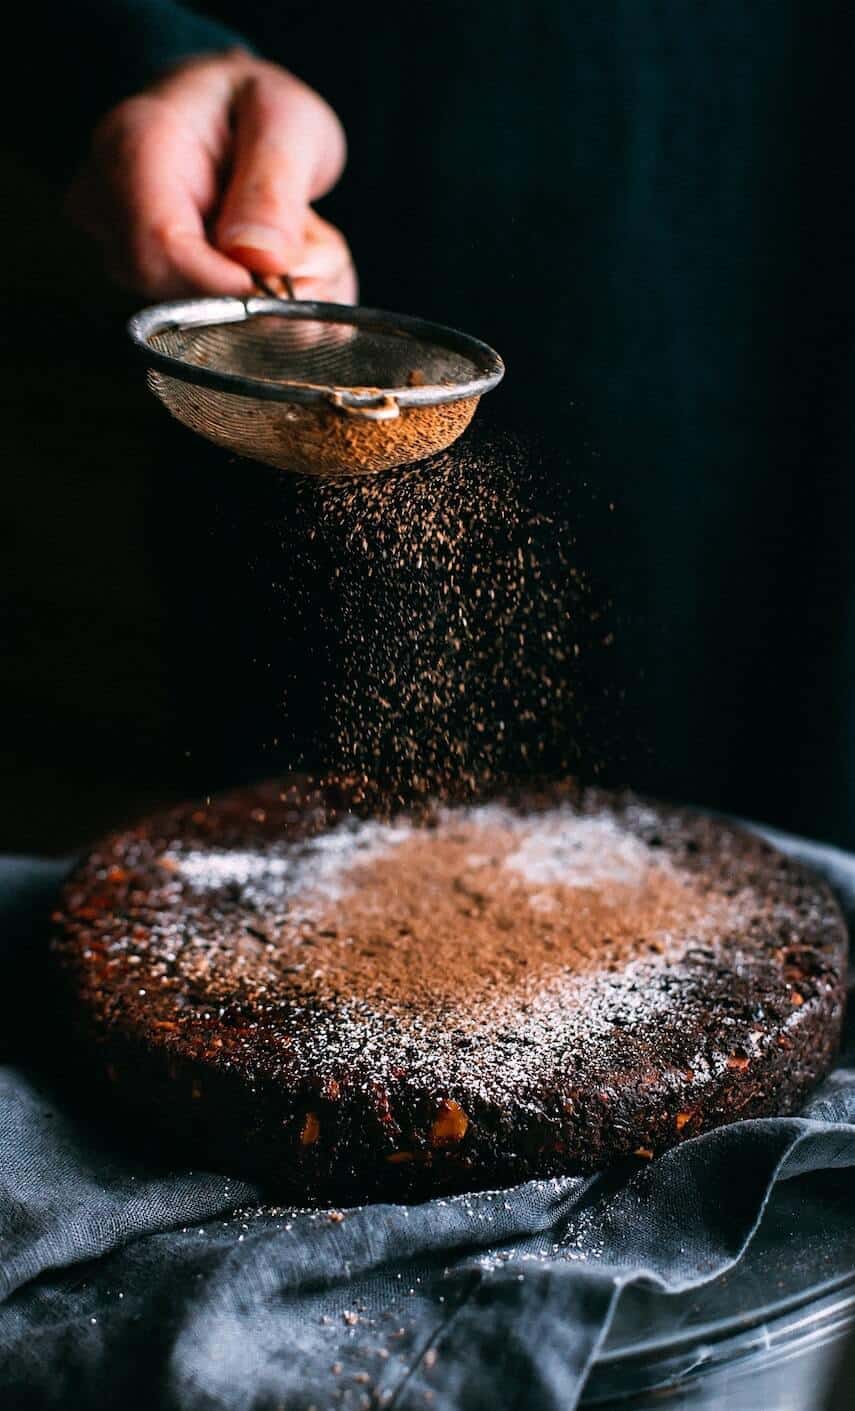 Powdered chocolate being sifted onto a round chocolate cake